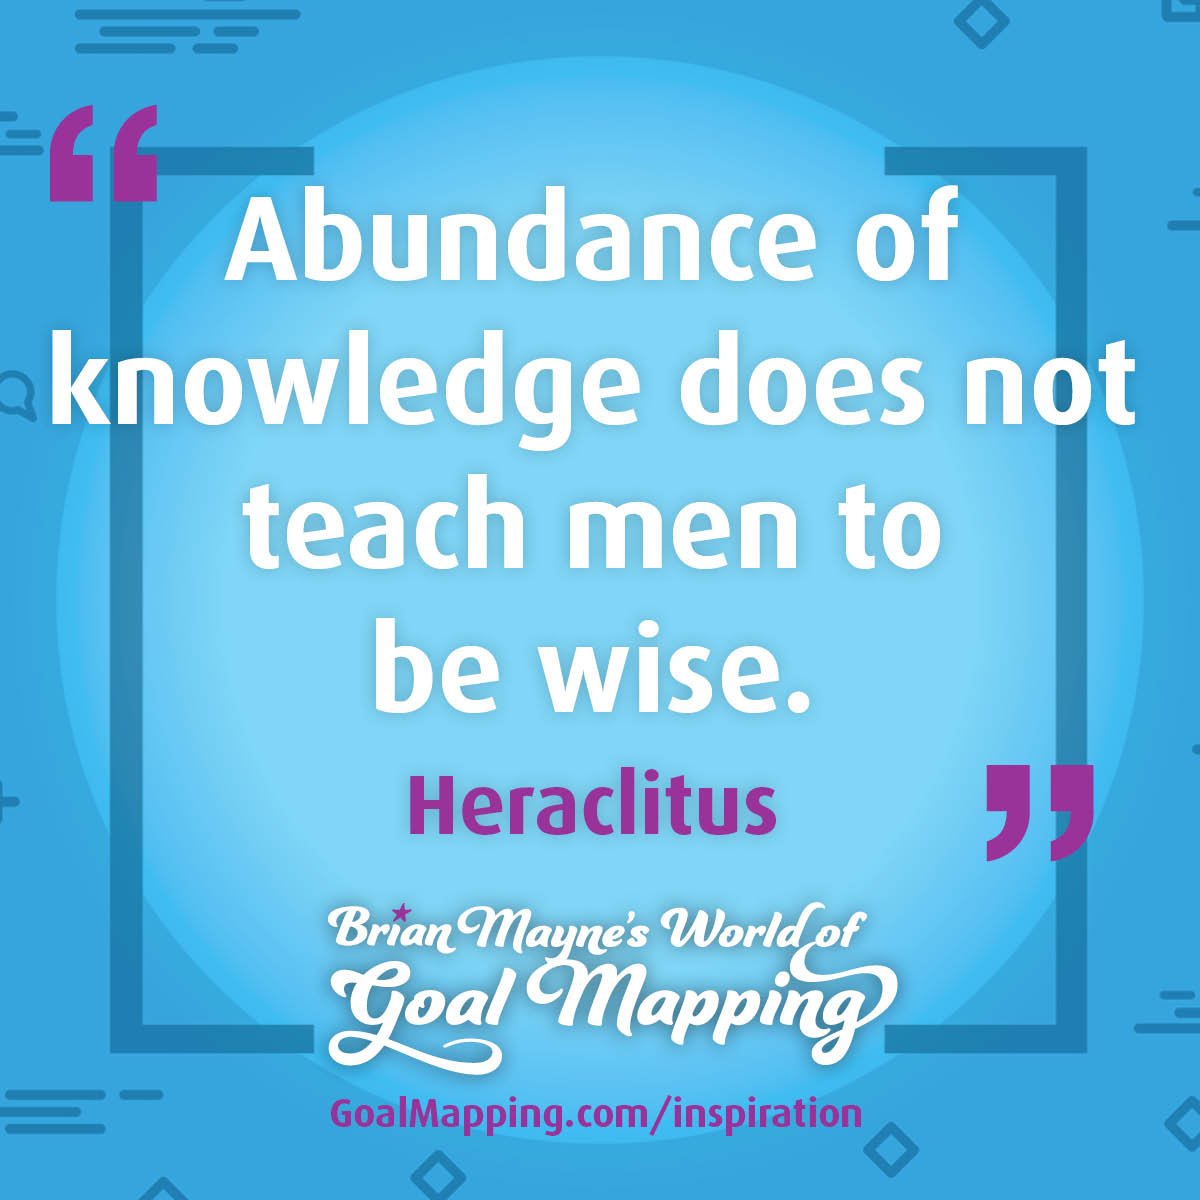 "Abundance of knowledge does not teach men to be wise." Heraclitus